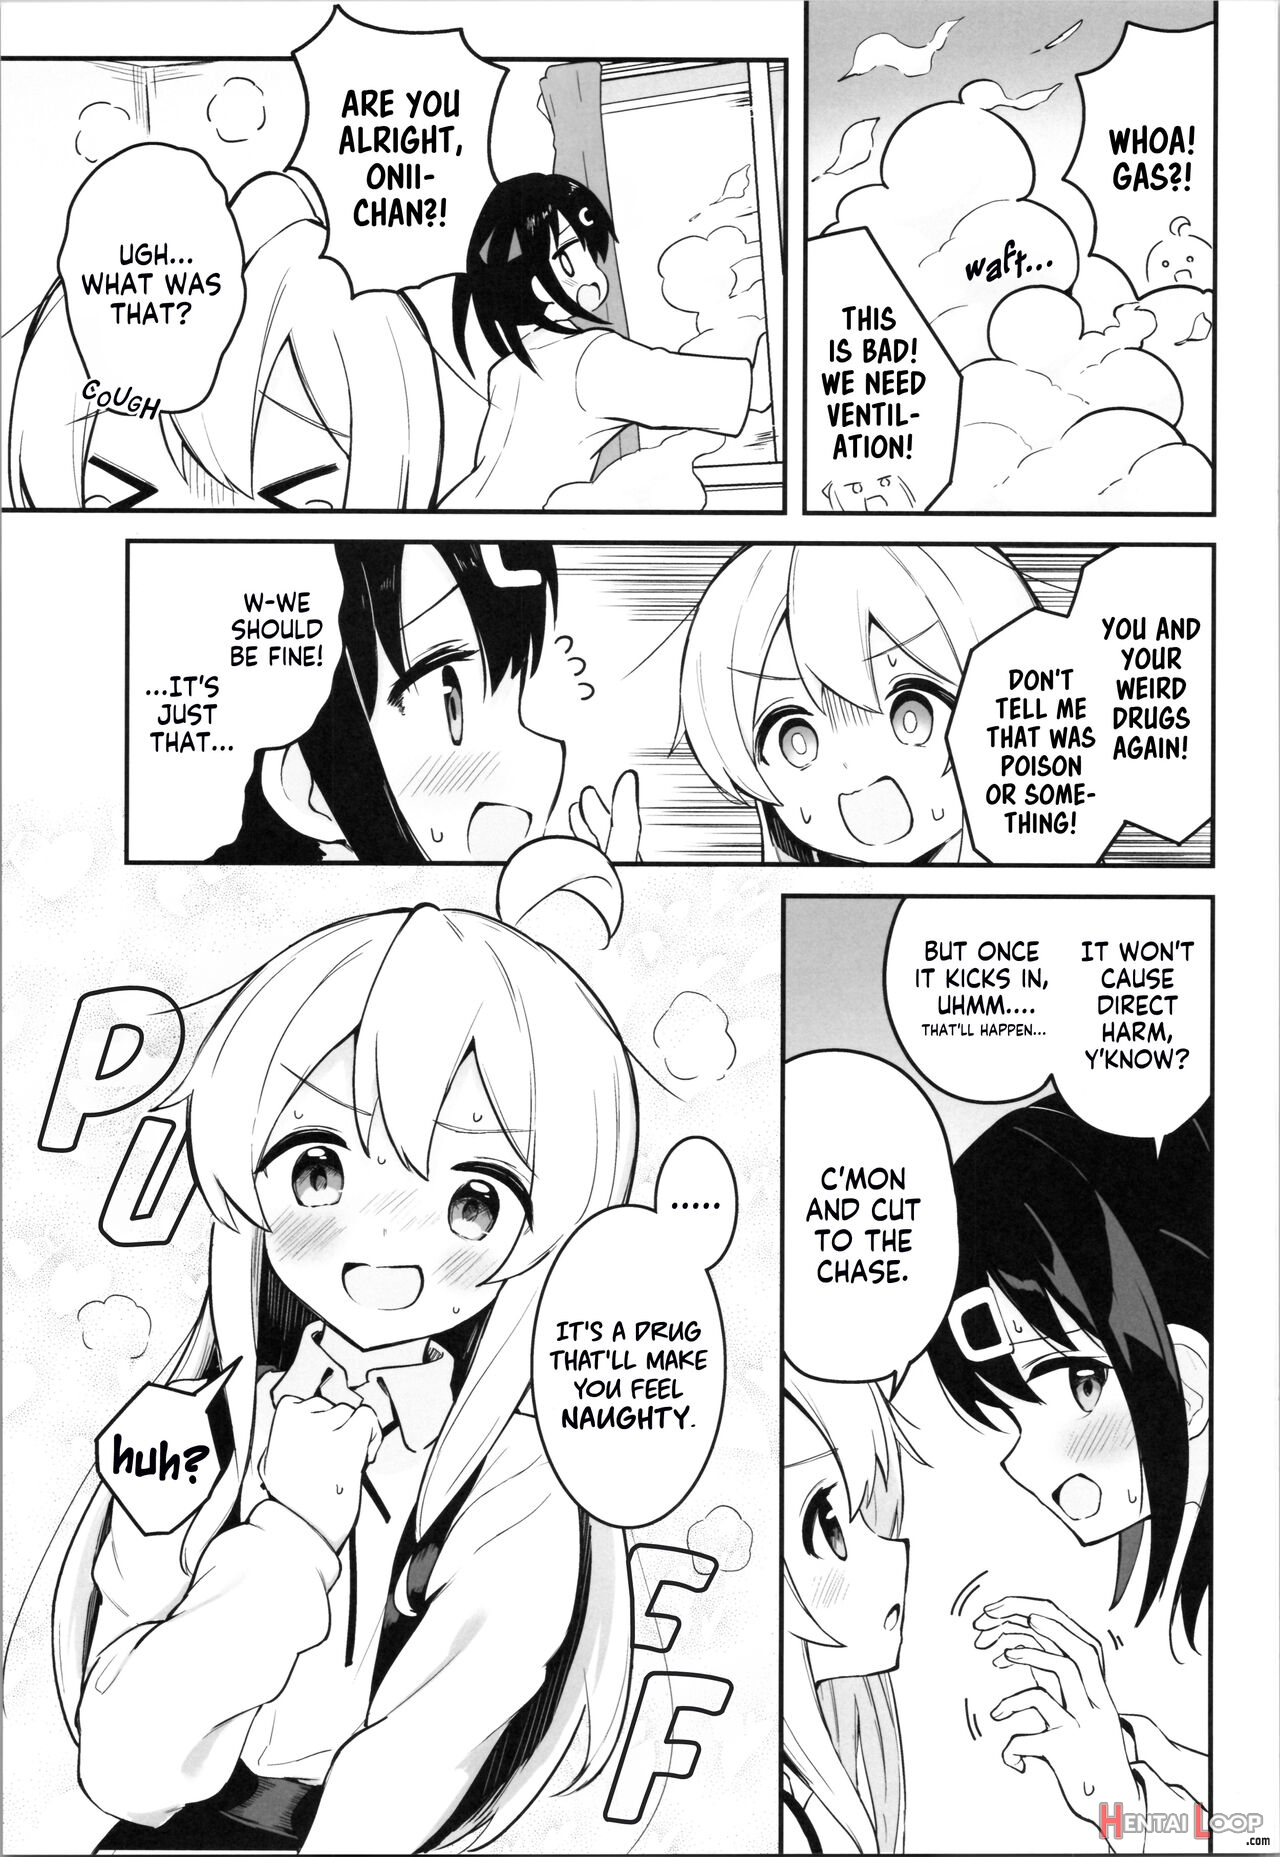 Onii-chan Is A ♀ After All! page 7